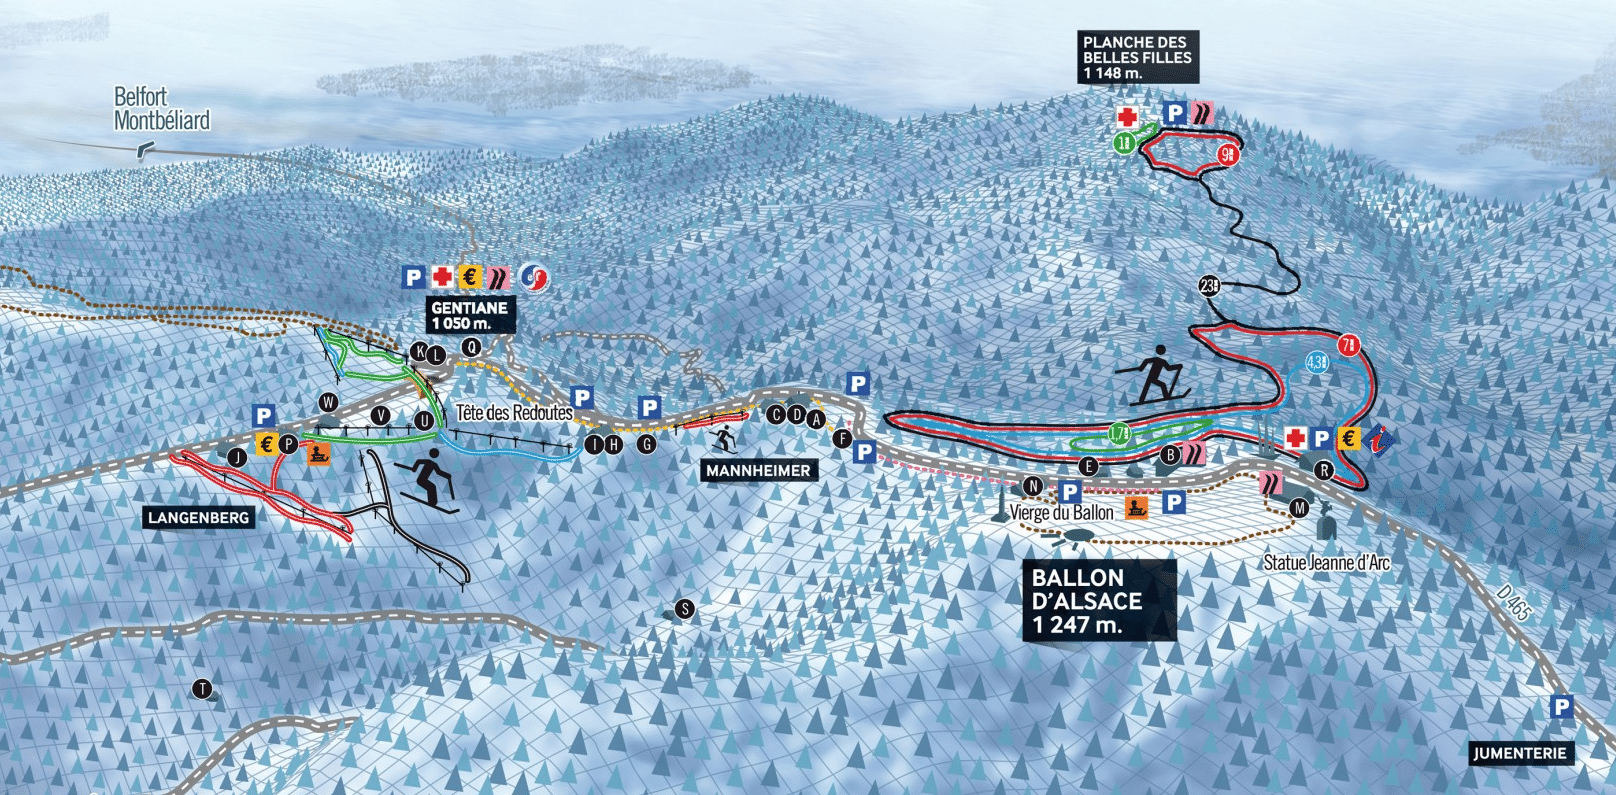 Ballon d'Alsace - Map of the cross-country ski trails